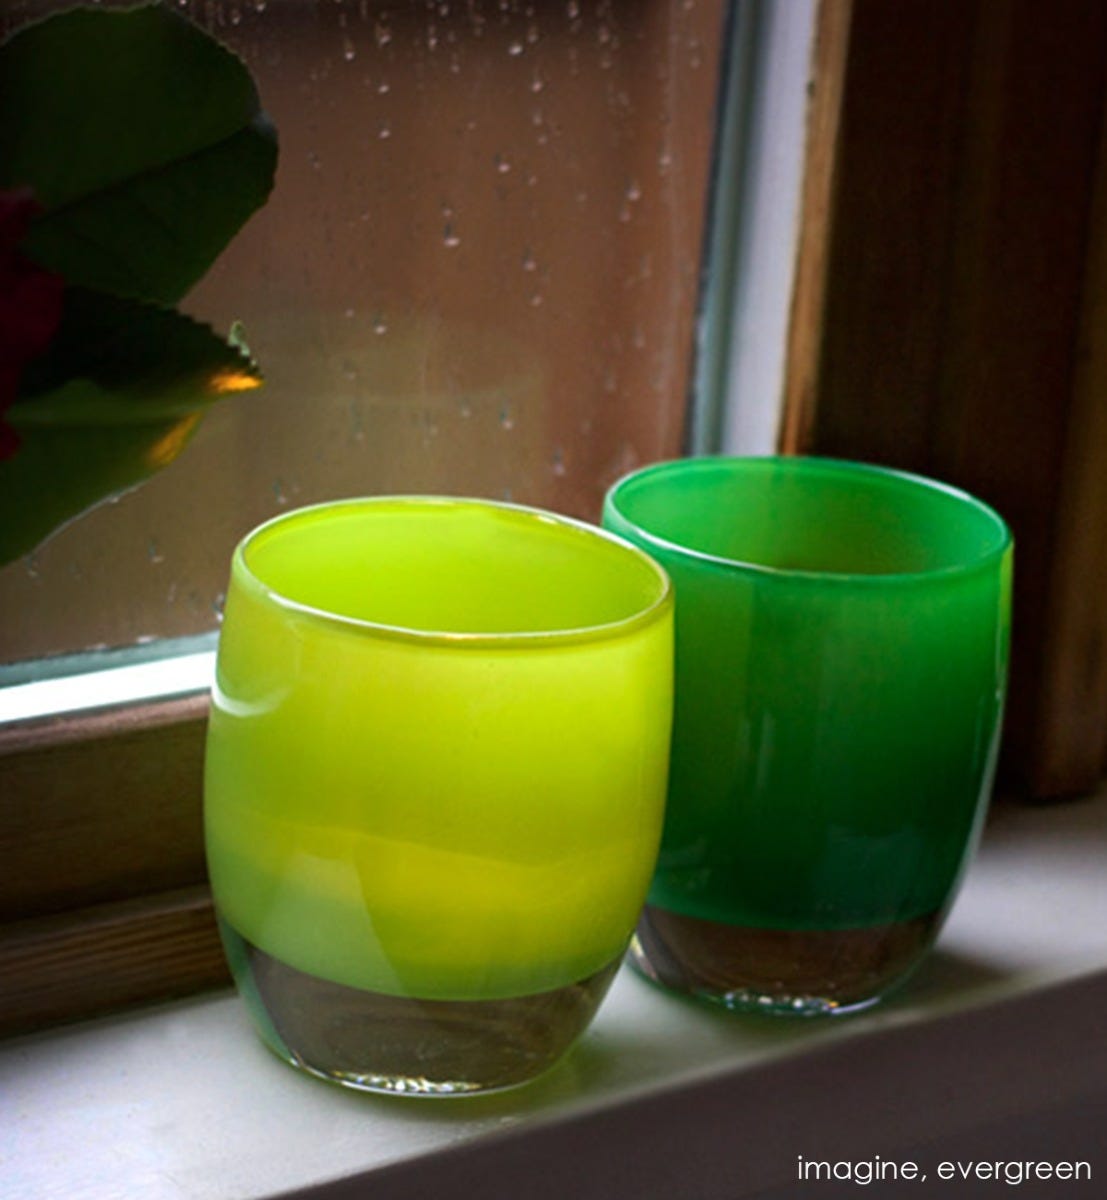 imagine, kashmir green, hand-blown glass votive candle holder. Paired with evergreen.